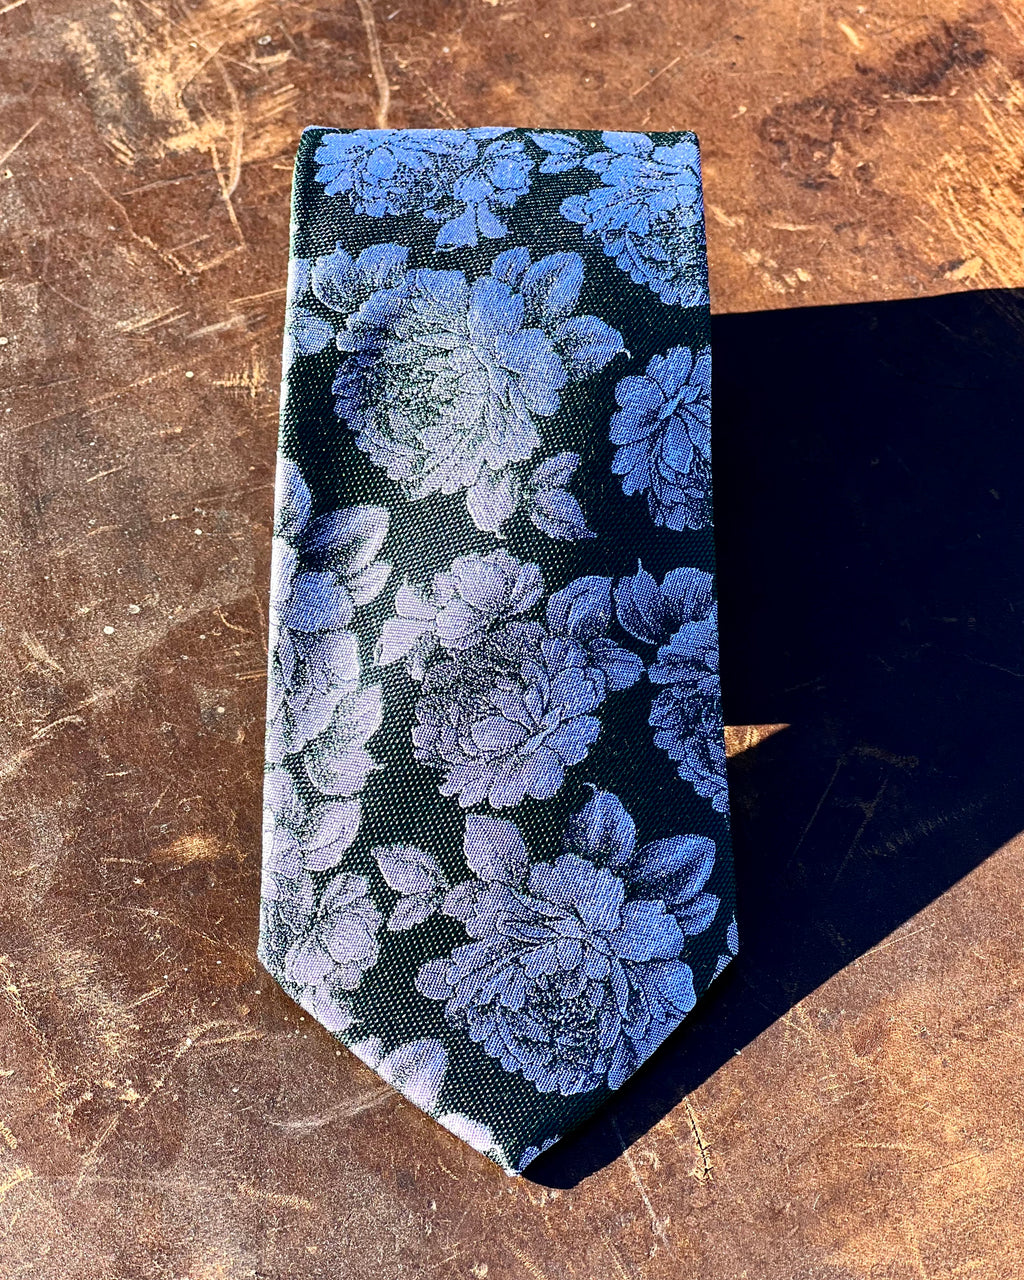 Pure silk tie featuring purple roses against a black backgtround